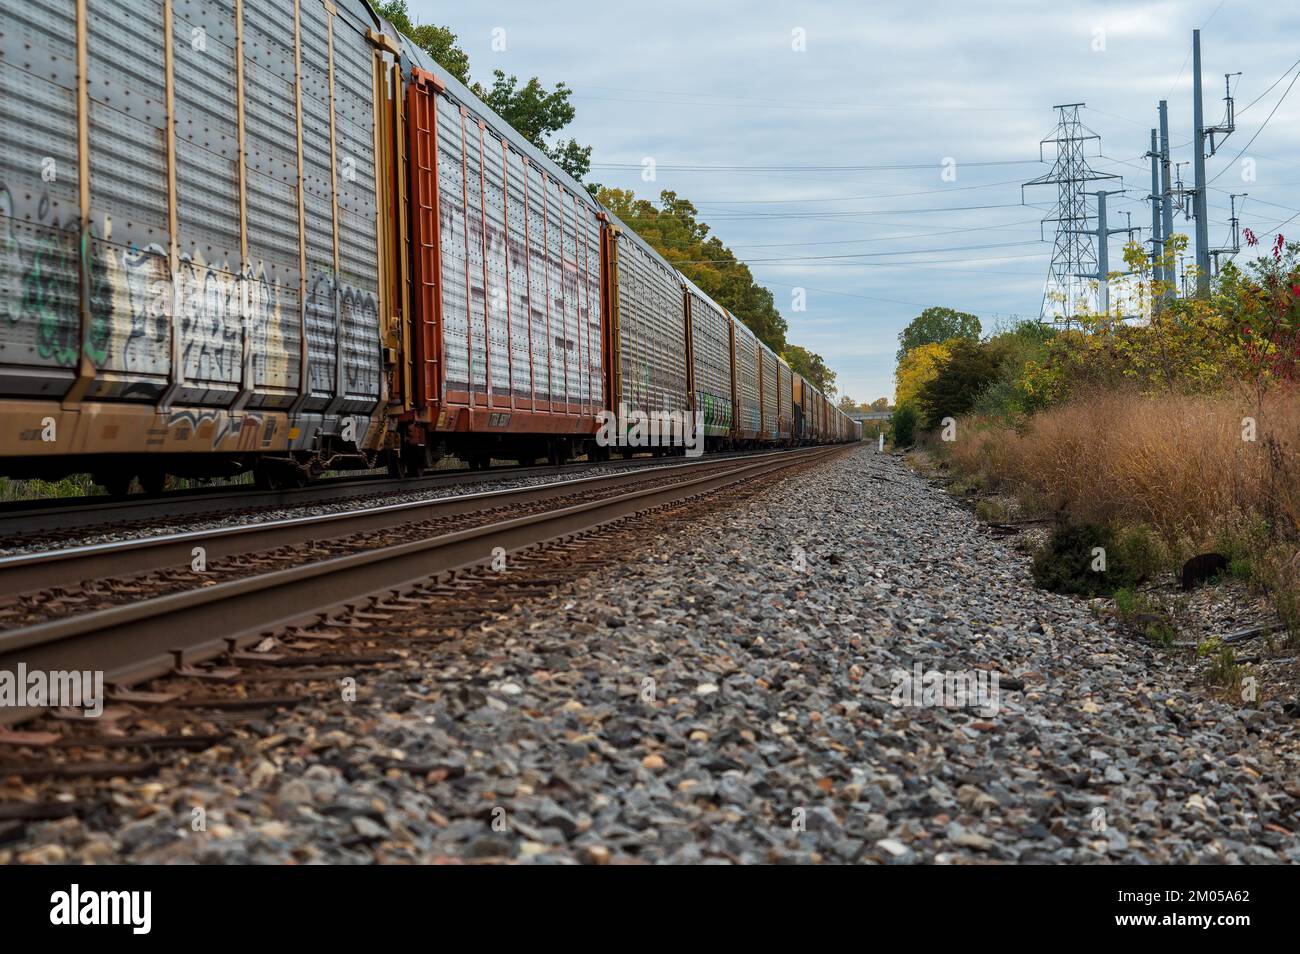 Freight train travelling through rural area in the midwest Stock Photo